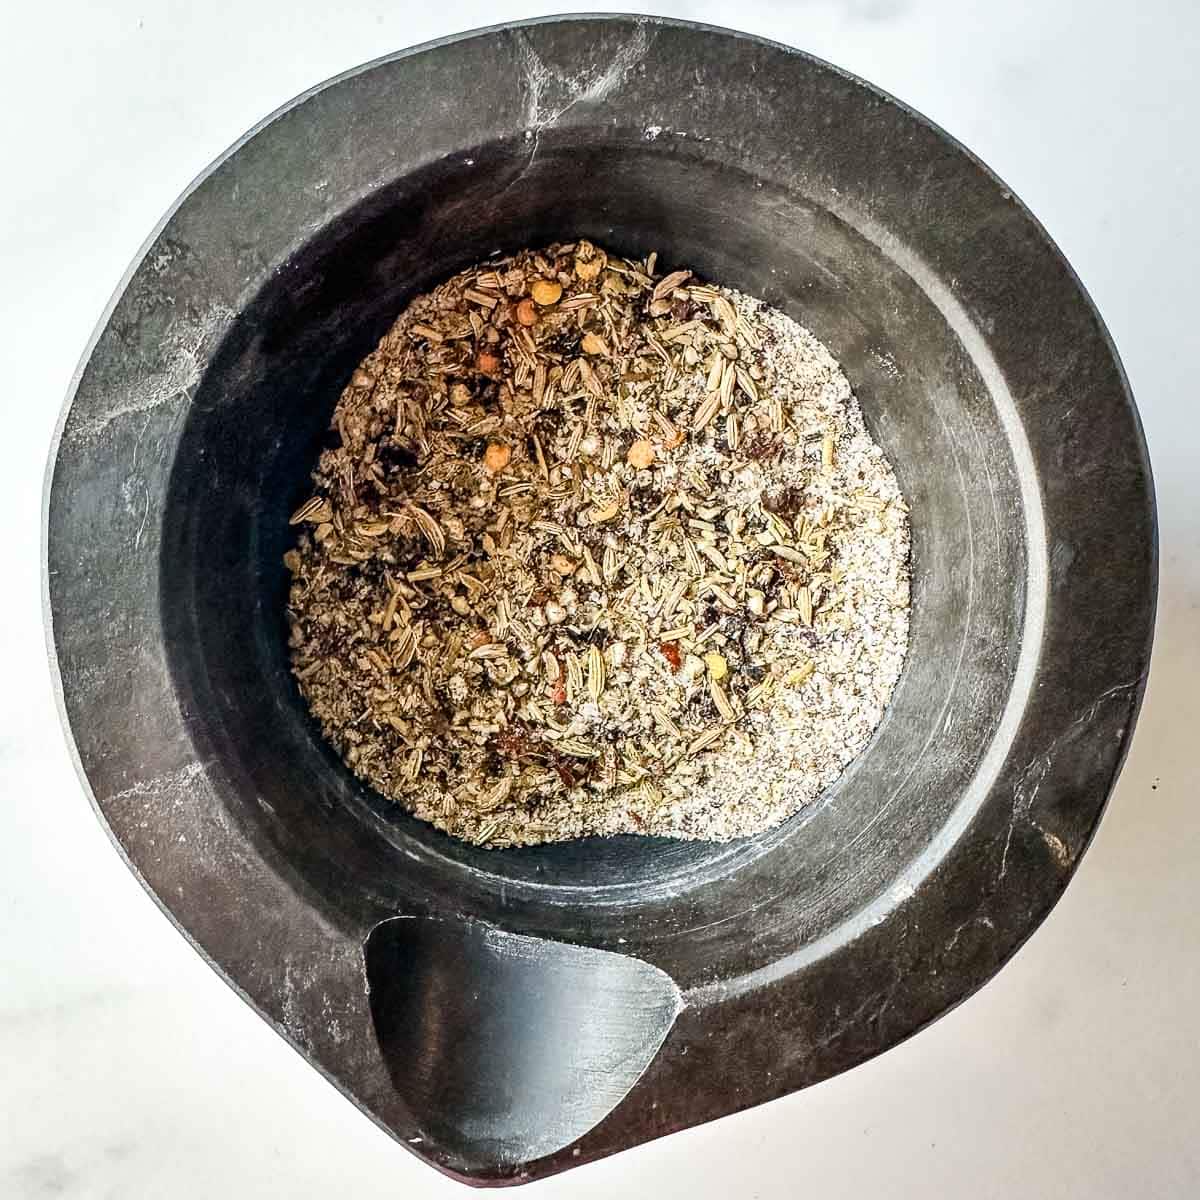 A mortar filled with ground herbs and spices.